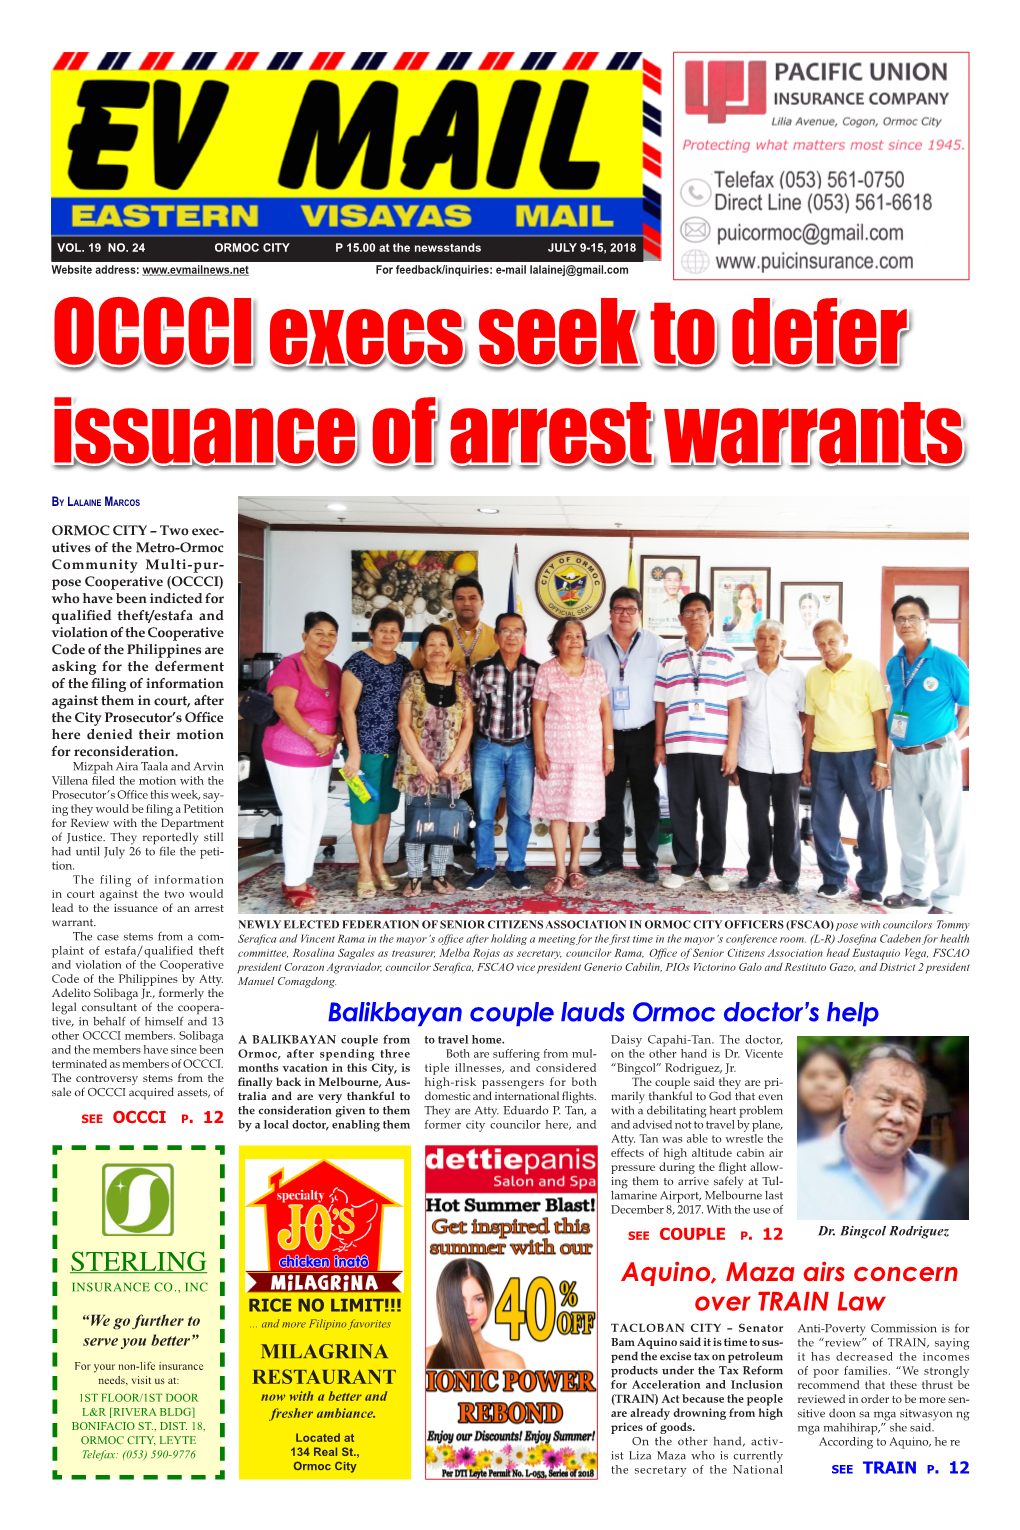 OCCCI Execs Seek to Defer Issuance of Arrest Warrants by Lalaine Marcos